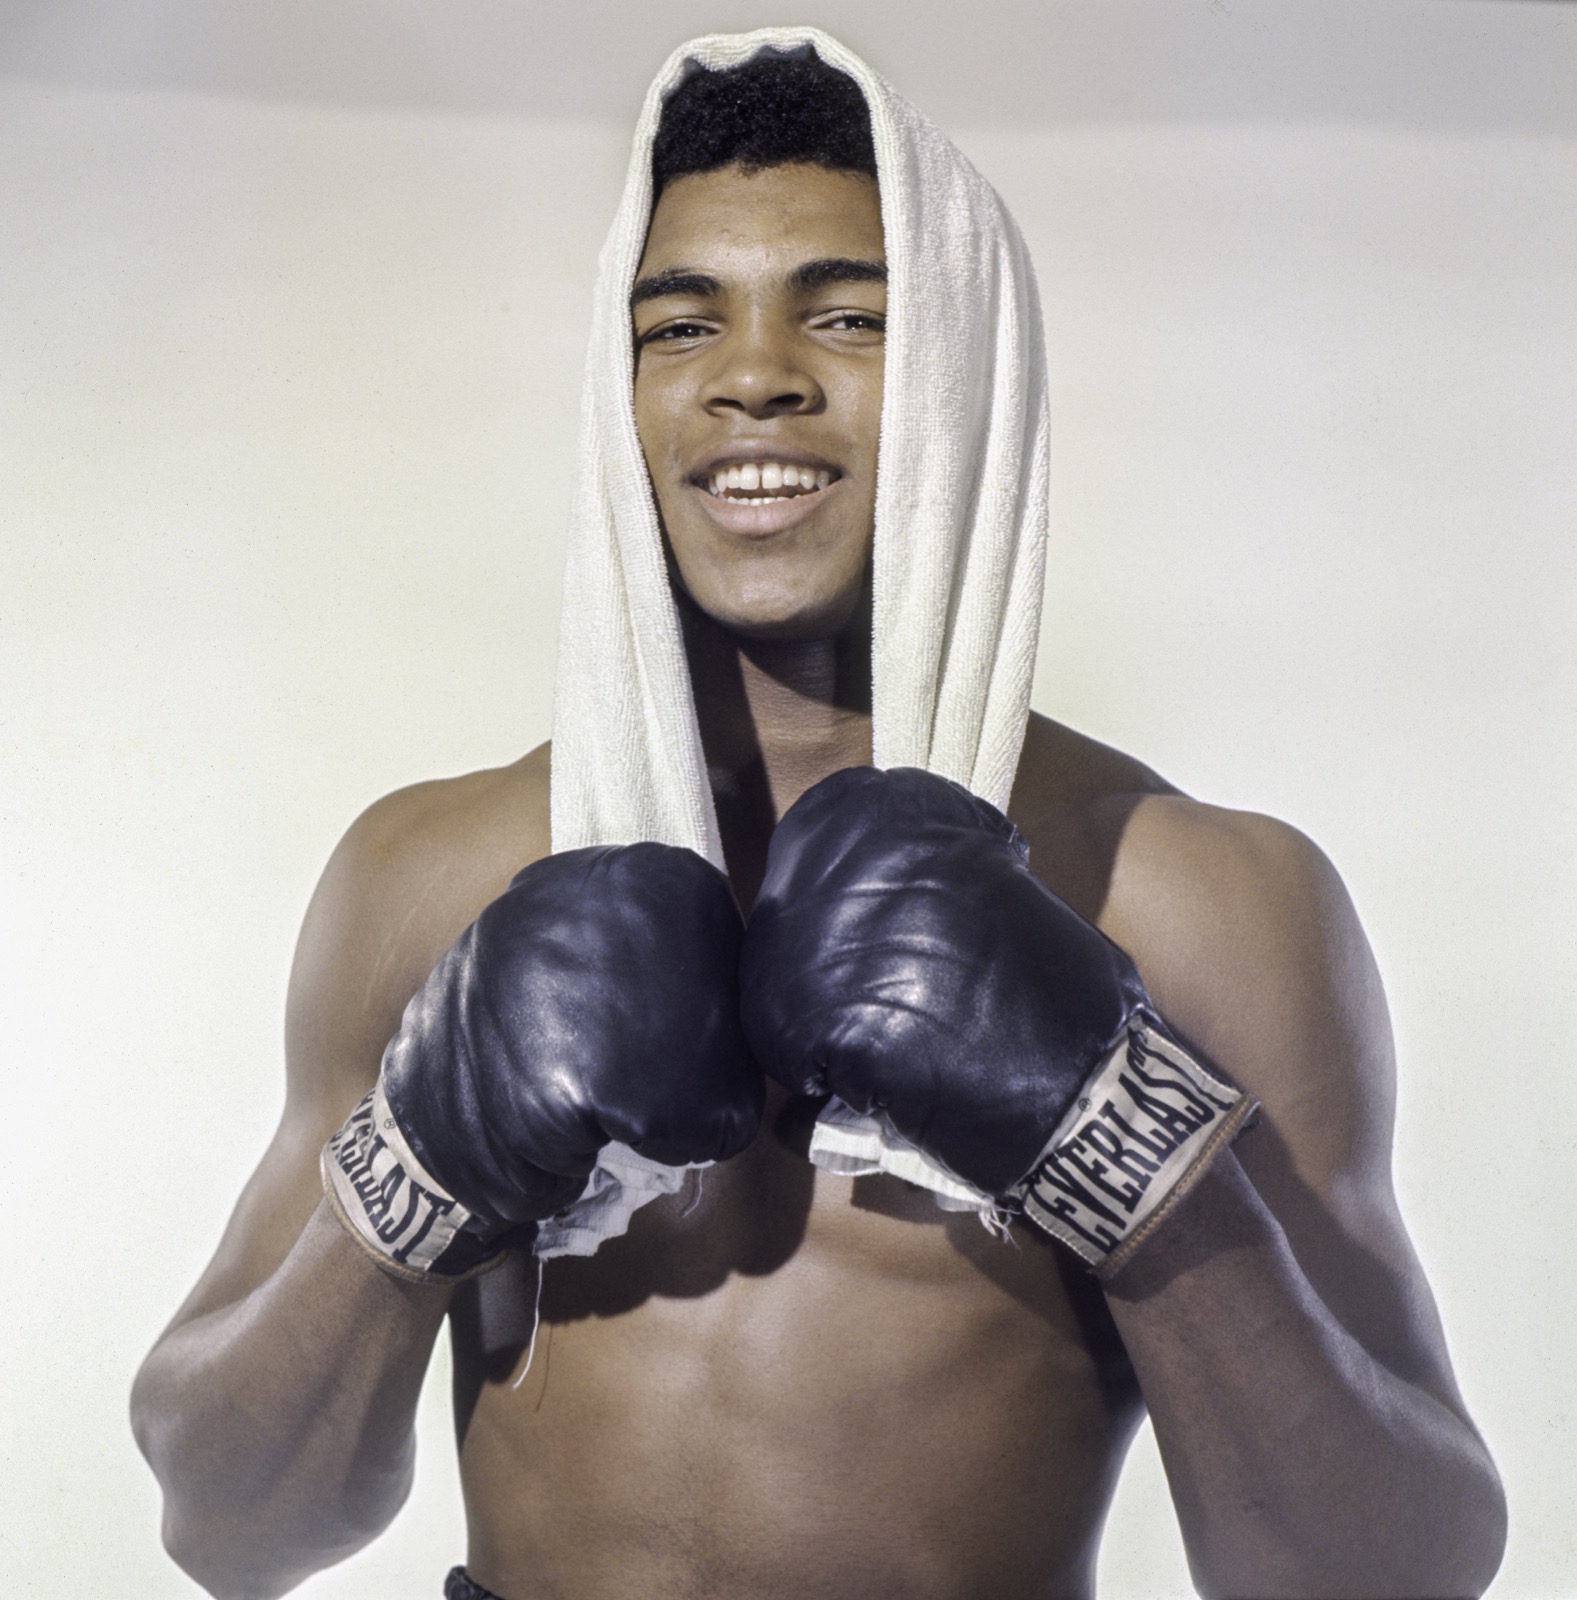 Cassius Clay poses for the camera on May 17, 1962 in Long Island, New York. He was among the people to visit Skin's grandad's shebeen. Photo: Stanley Weston/Getty Images